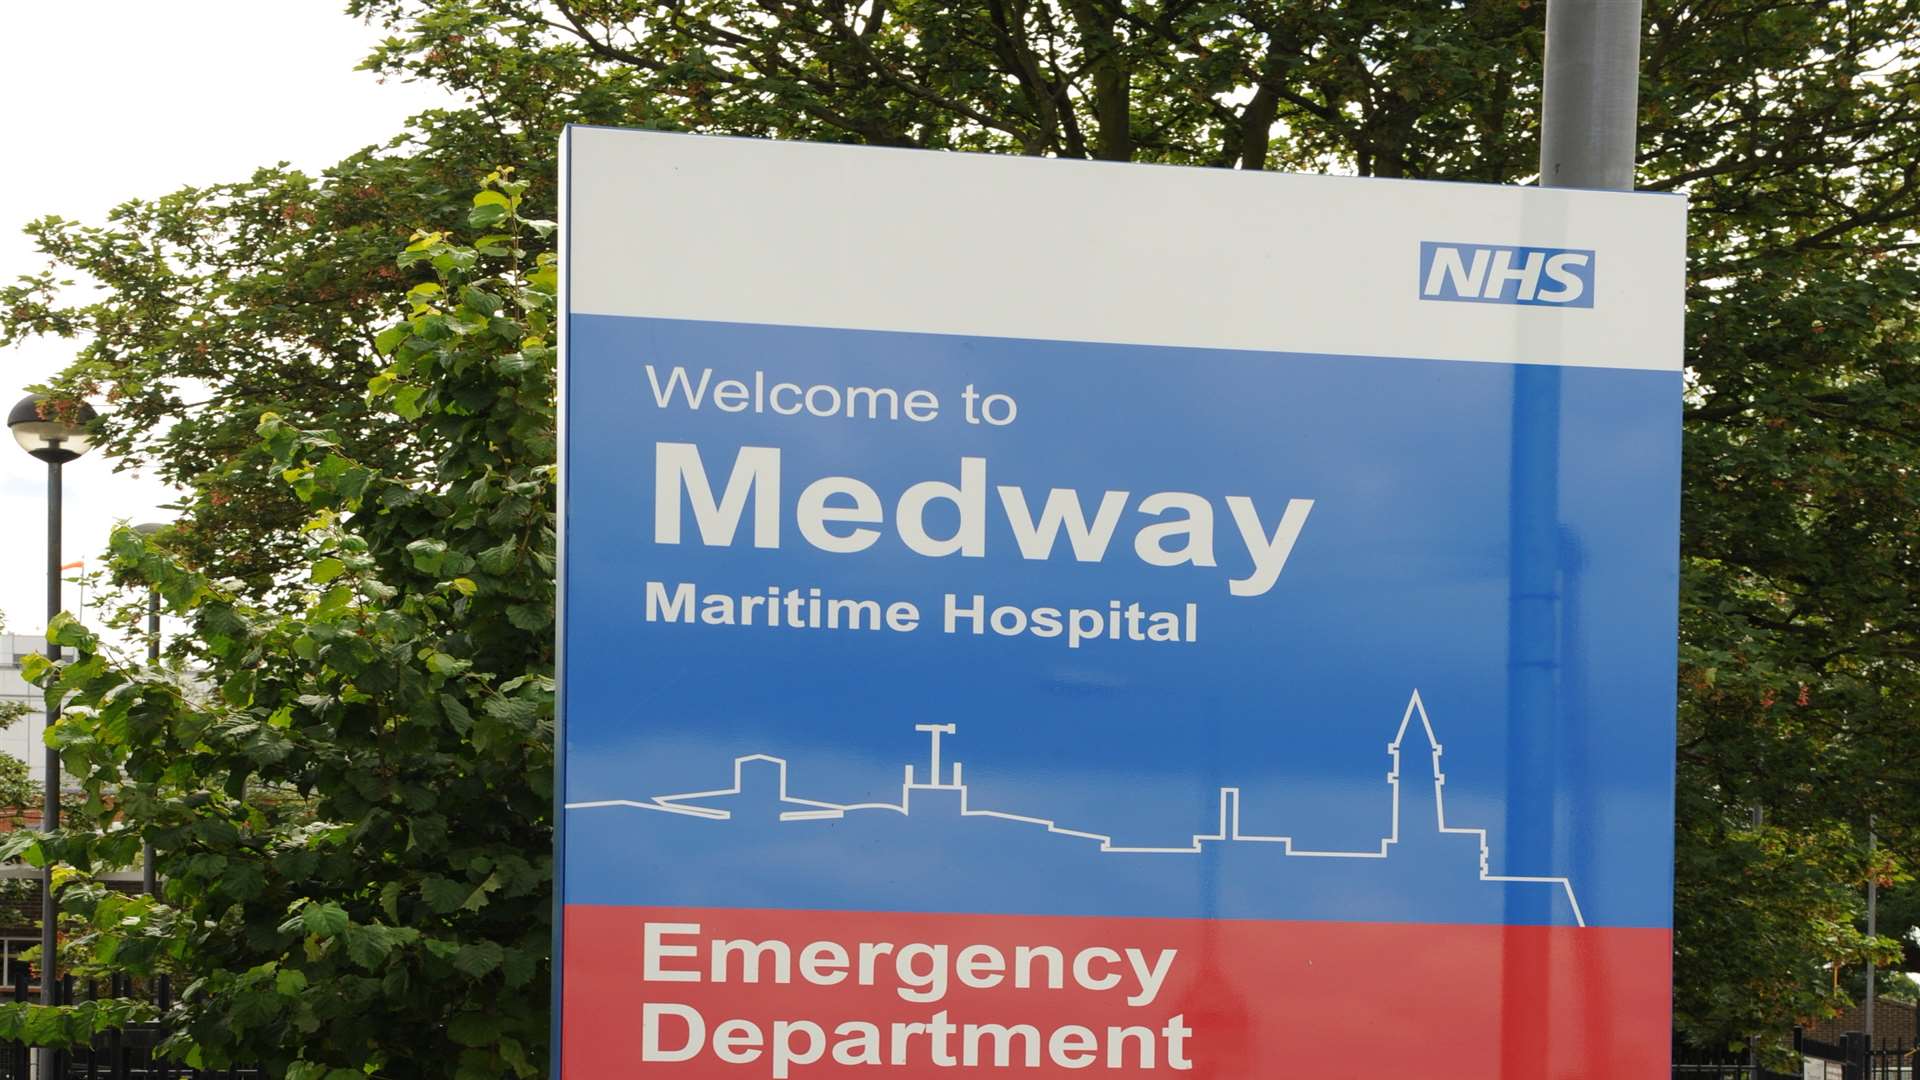 Medway Maritime